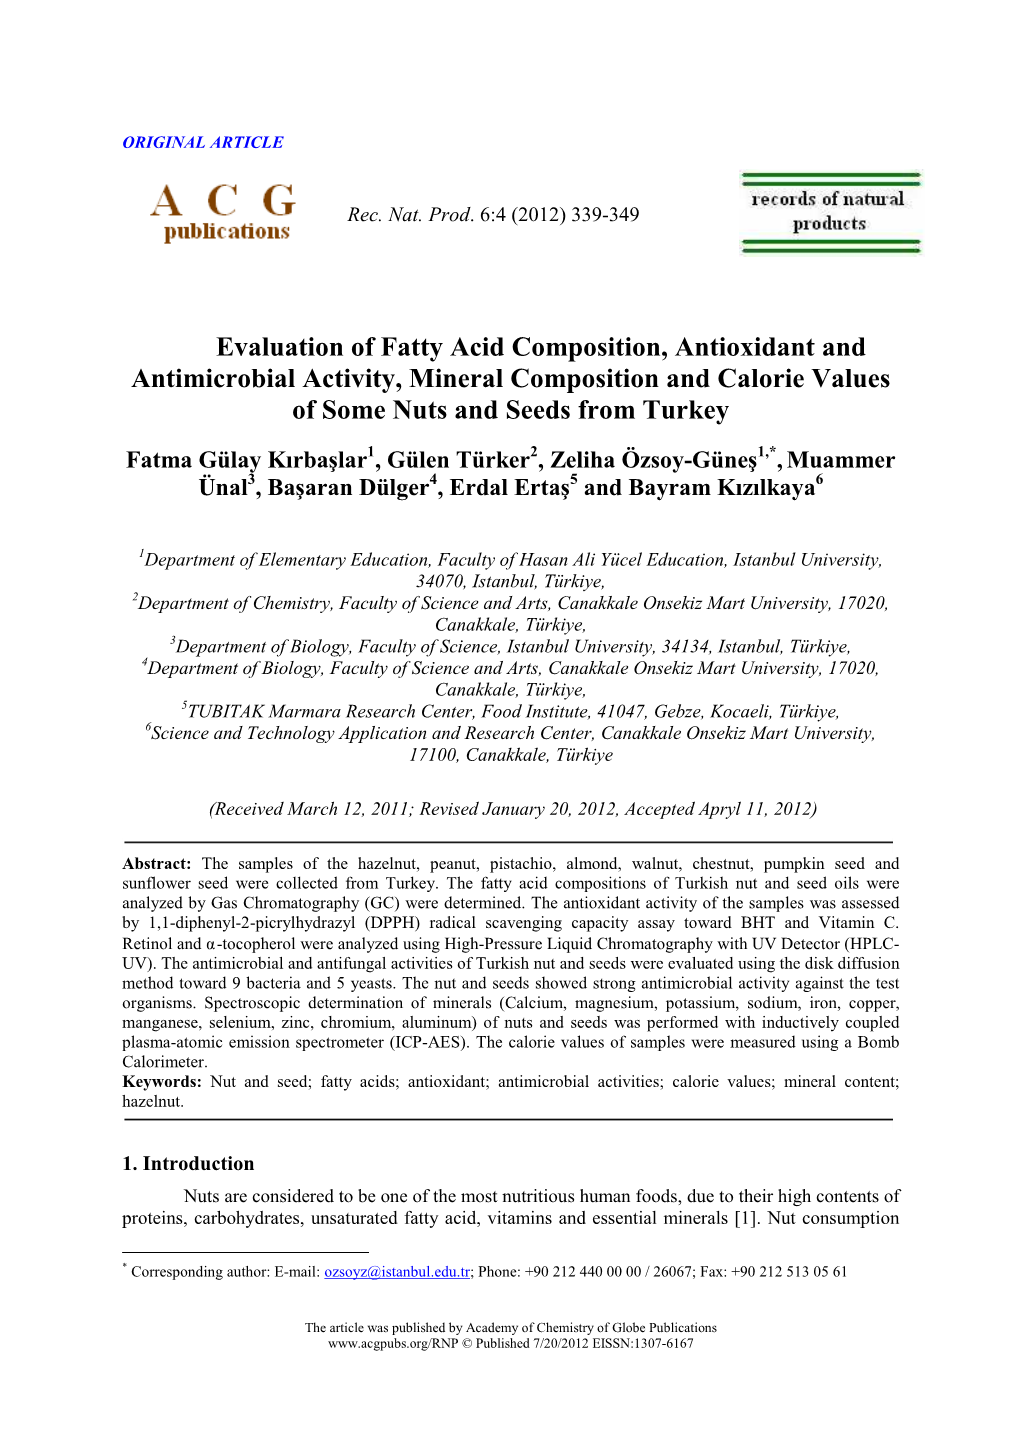 Evaluation of Fatty Acid Composition, Antioxidant and Antimicrobial Activity, Mineral Composition and Calorie Values of Some Nuts and Seeds from Turkey